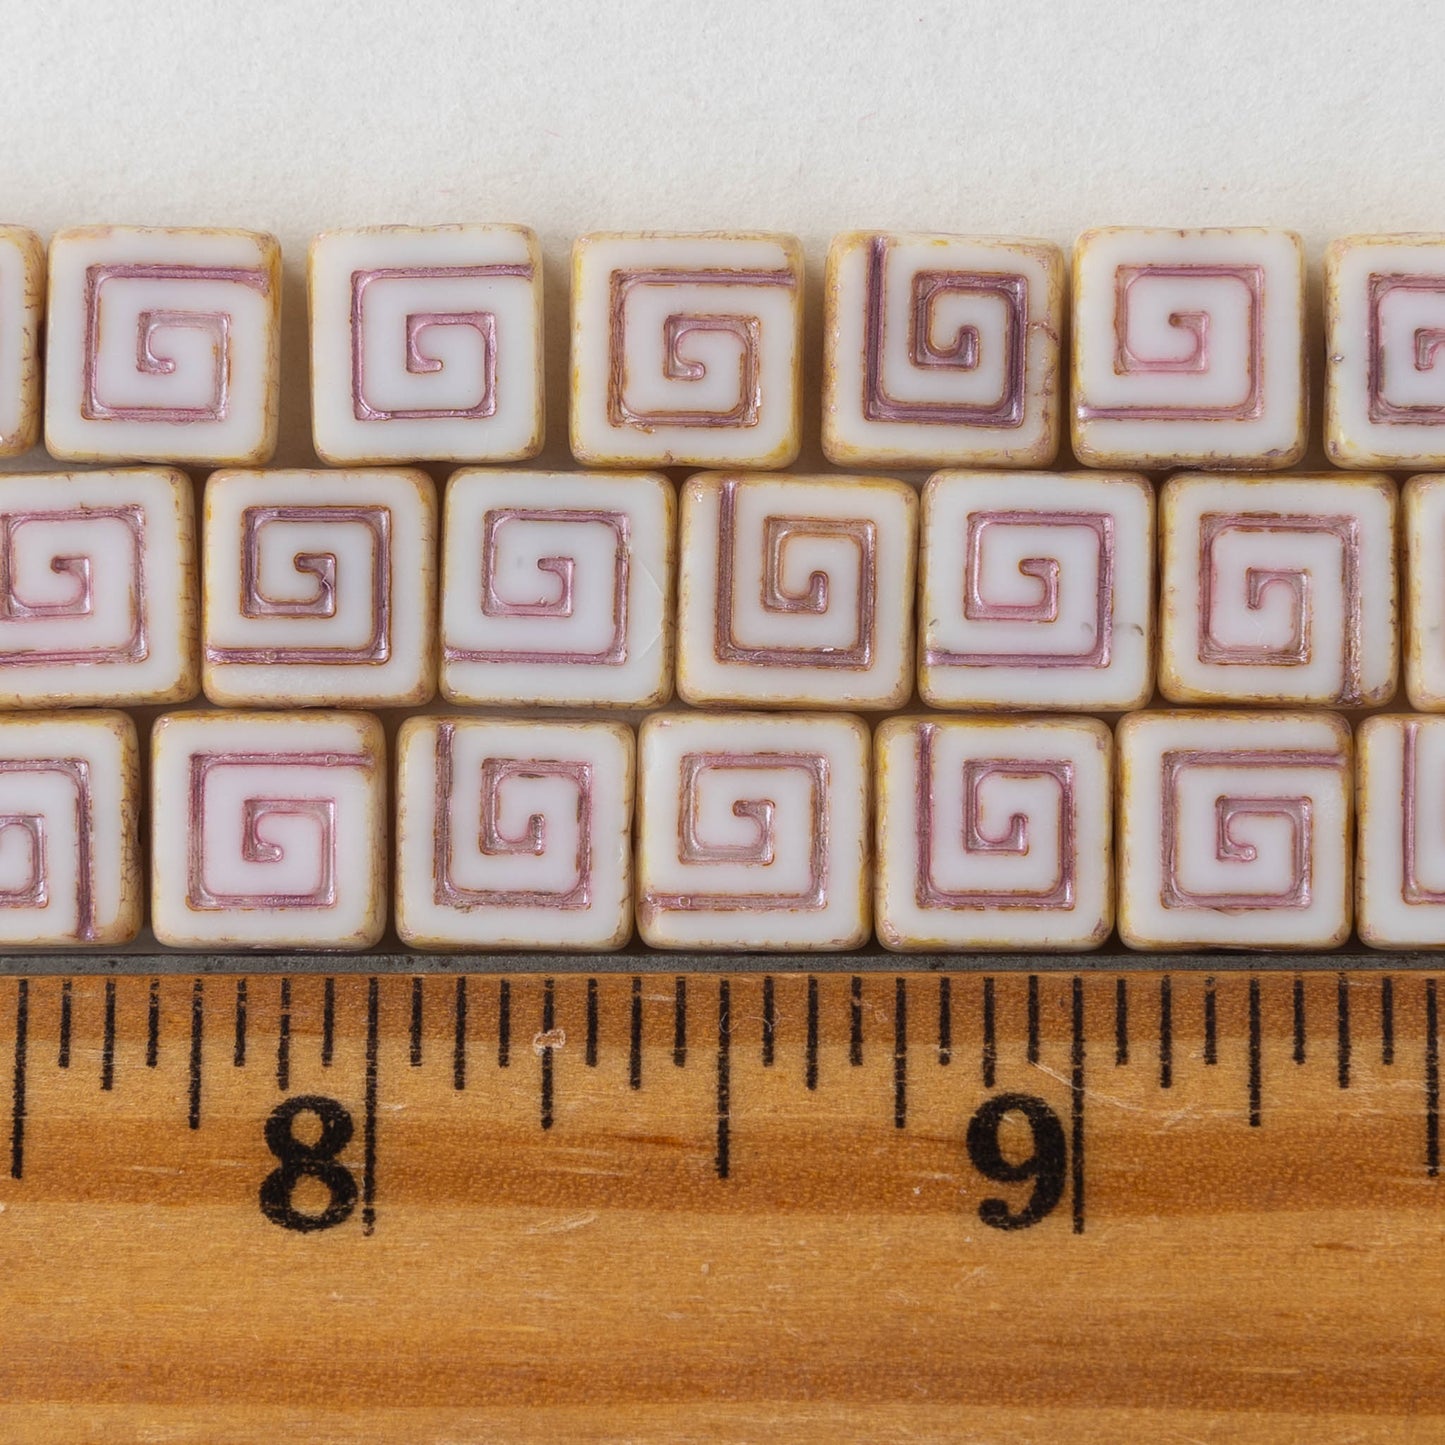 9mm Tile Bead with Spiral - Off White with Gold Wash - 10 Beads